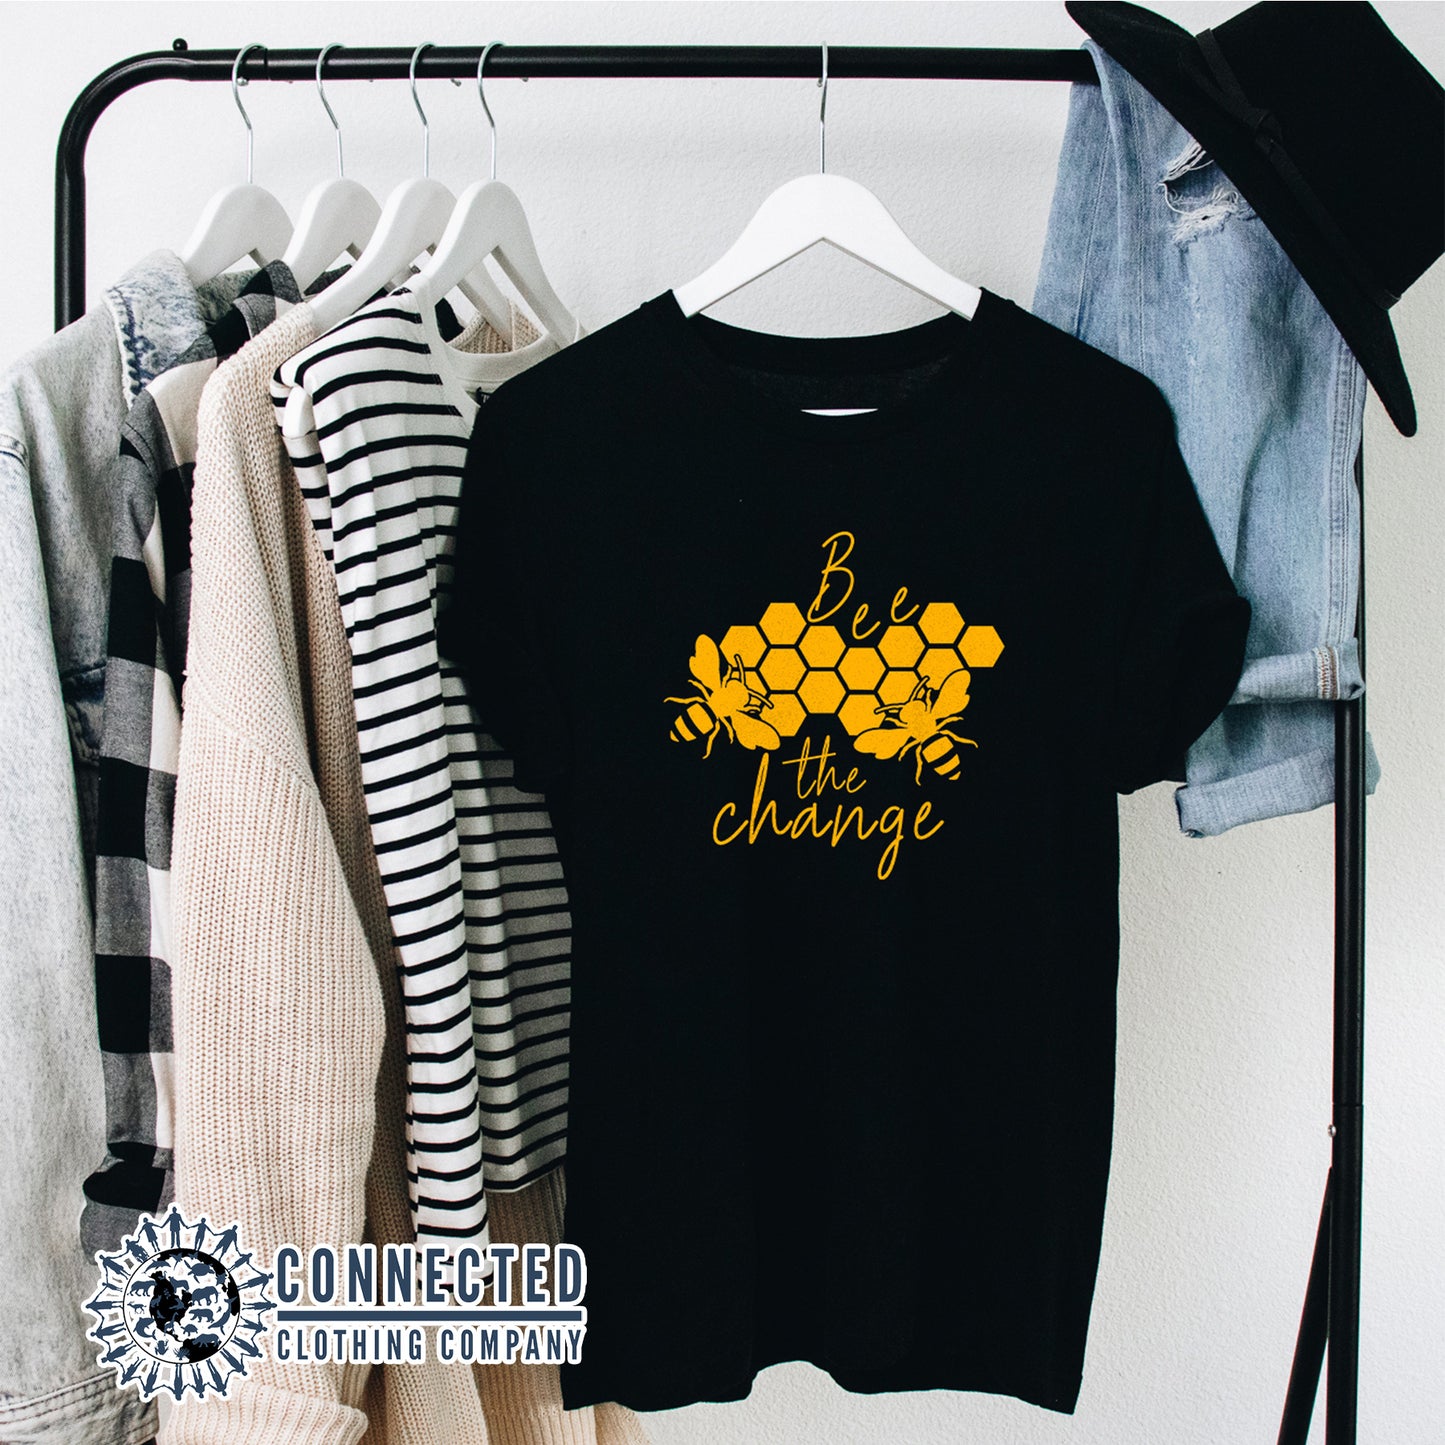 Black Bee The Change Unisex Short-Sleeve Tee - Connected Clothing Company - 10% of profits donated to the Honeybee Conservancy